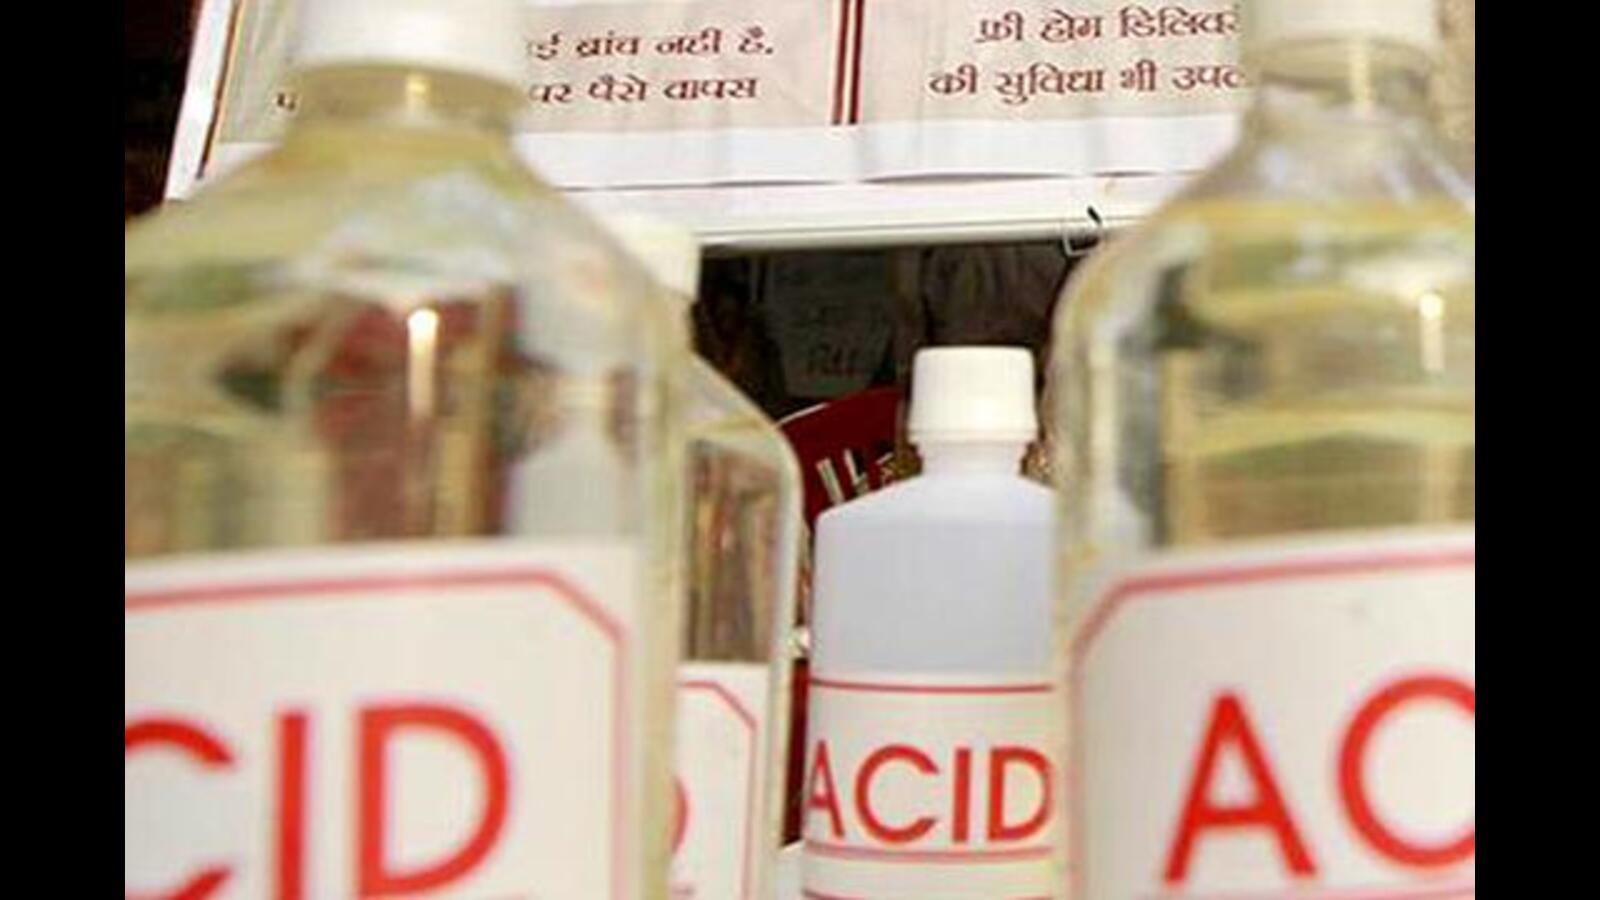 Court frames charges against two in Srinagar acid attack case